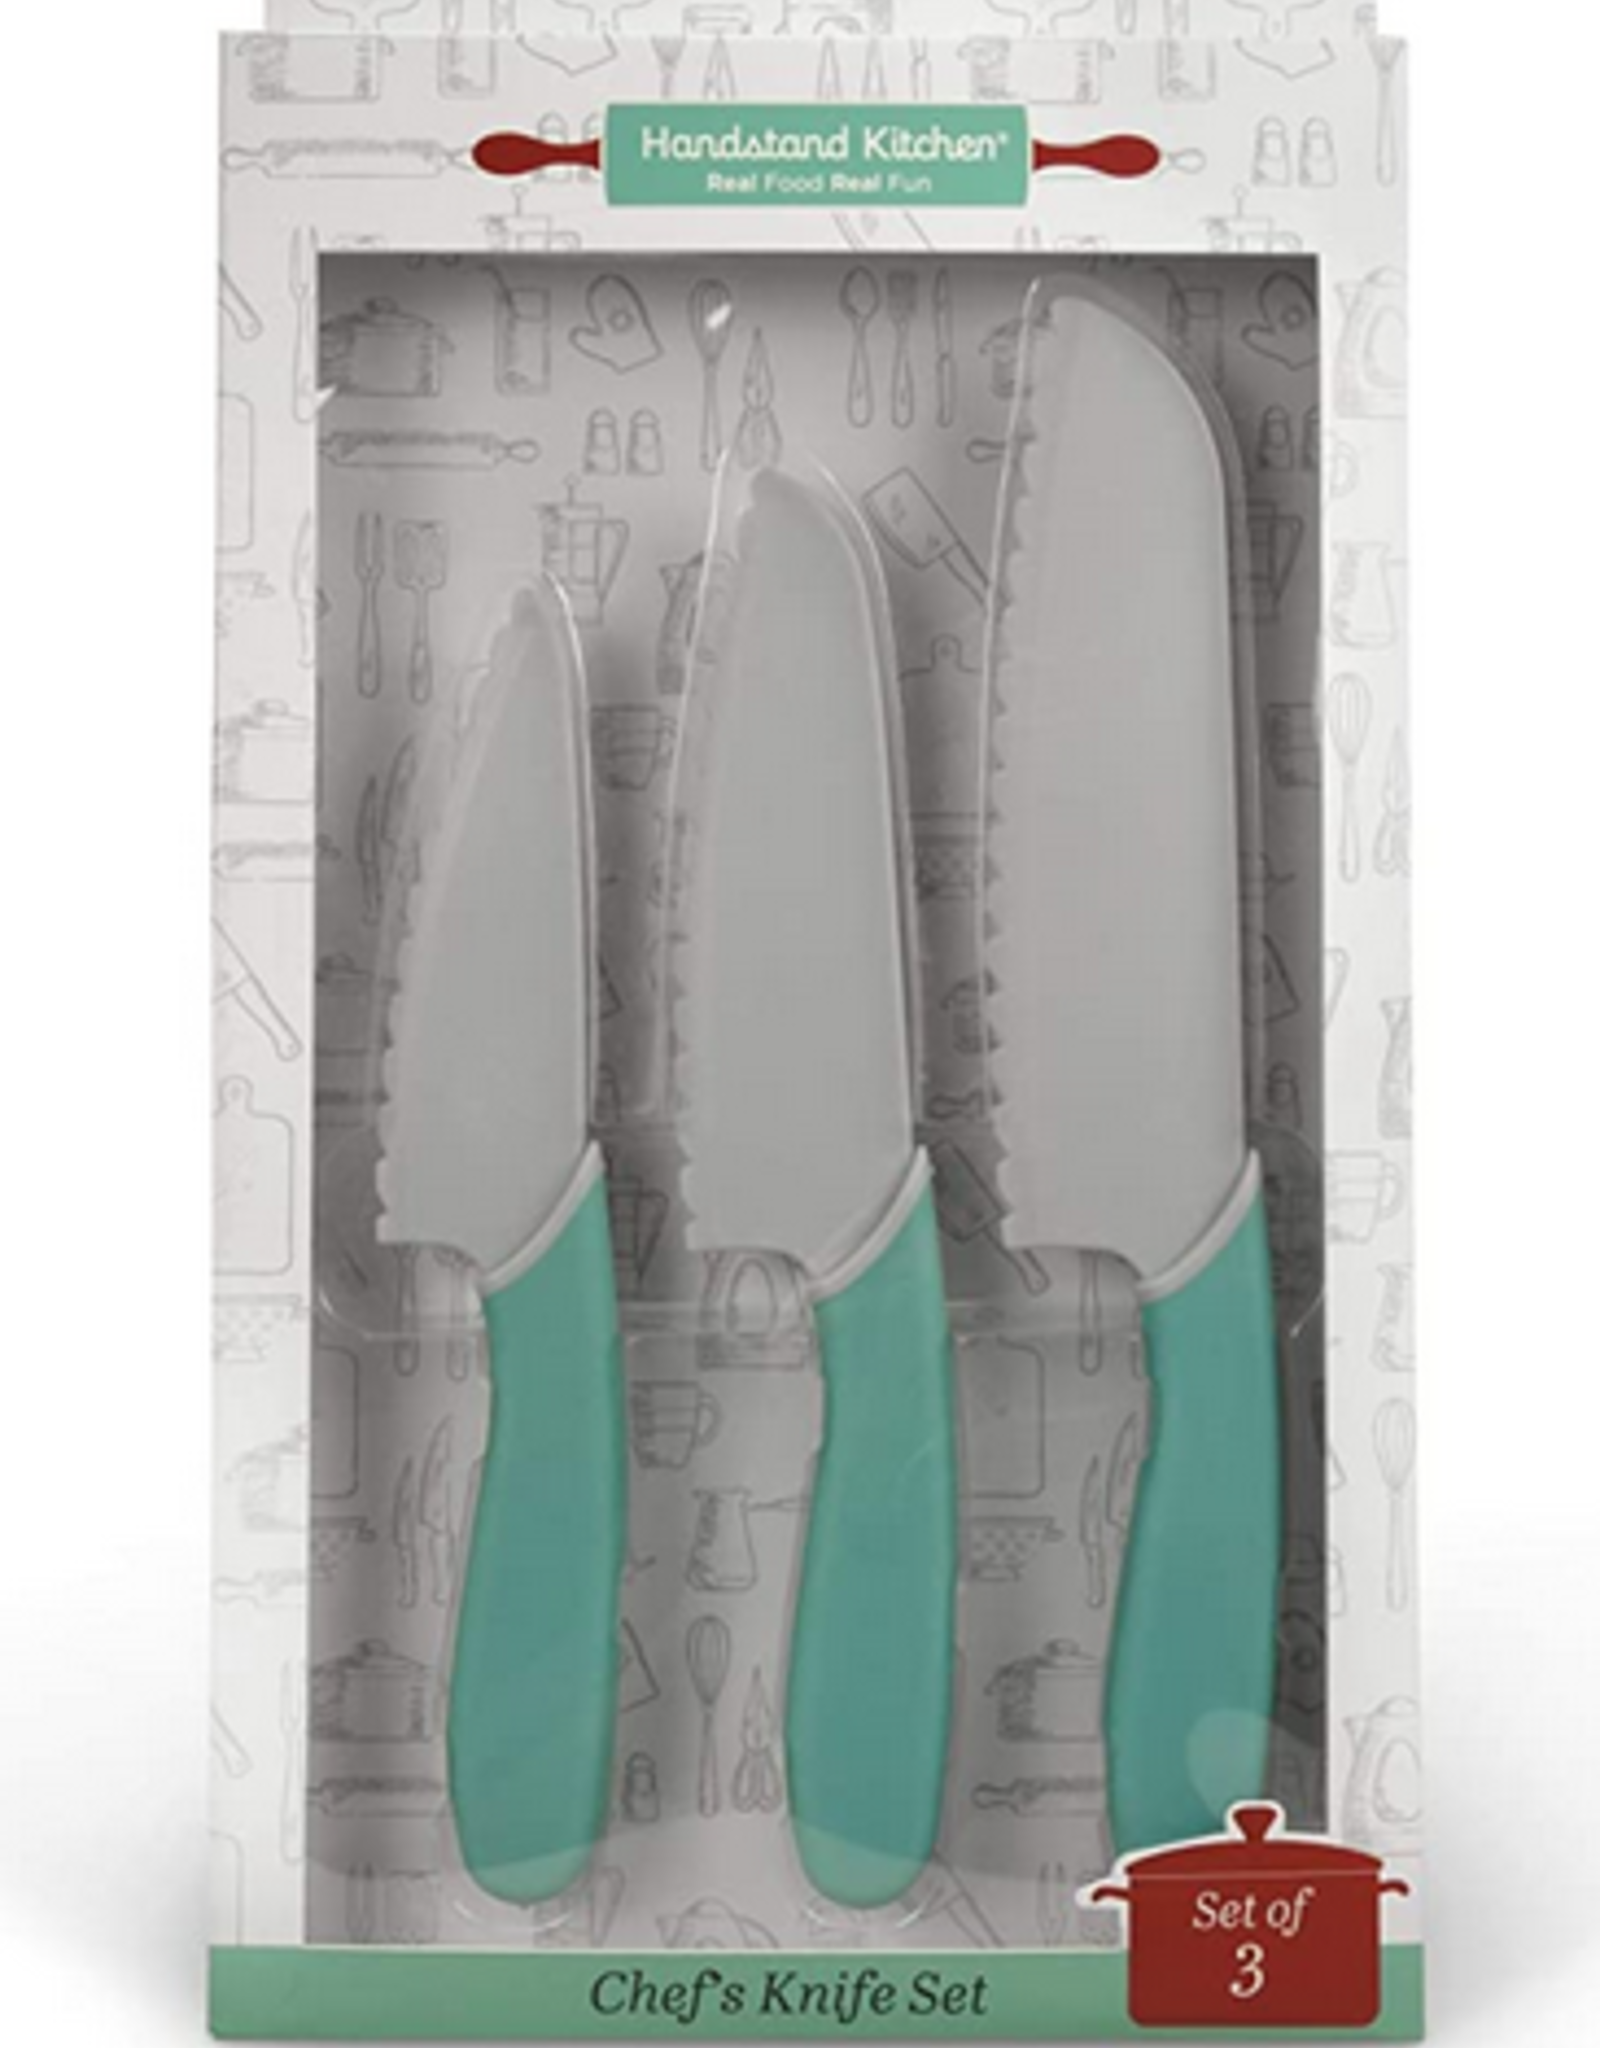 Tiitstoy 3 Piece Kids Kitchen Baking Knife Set,Safe To Use,Firm  Grip,Serrated Edges,Kids Knife,Protects Little Chef's,Perfect for Cutting  Food and